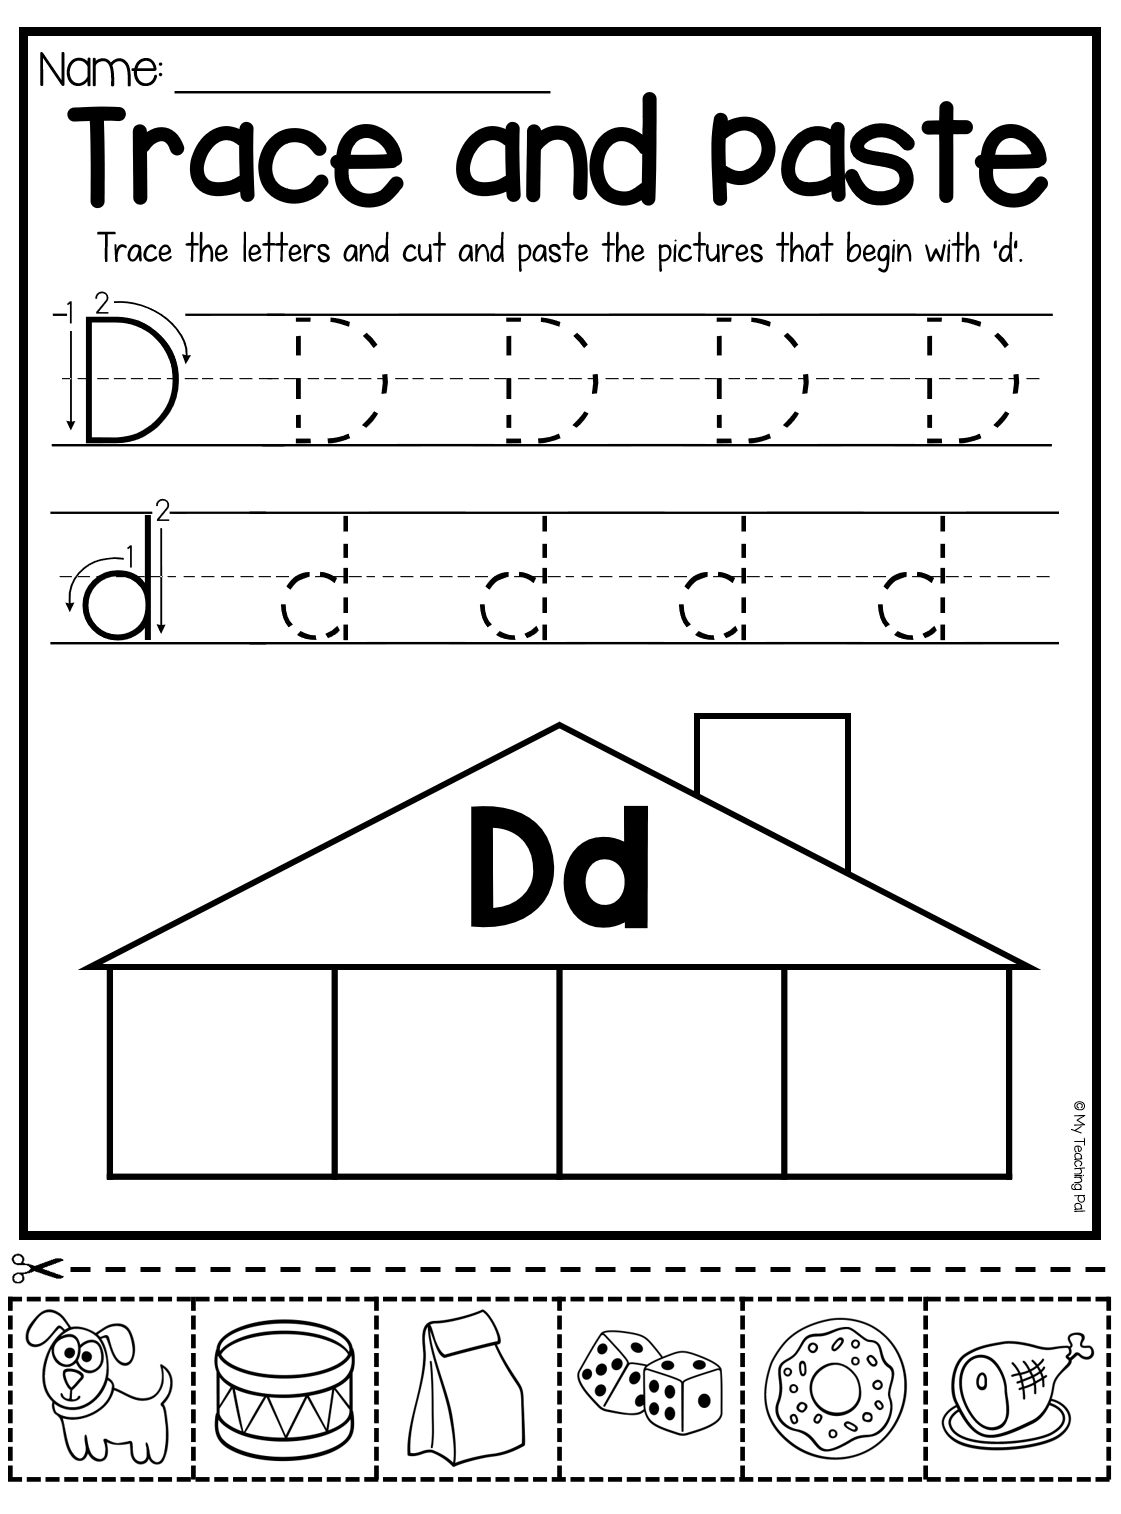 Beginning Sounds Worksheets - Trace And Paste | Beginning within Tracing Letter D Worksheets